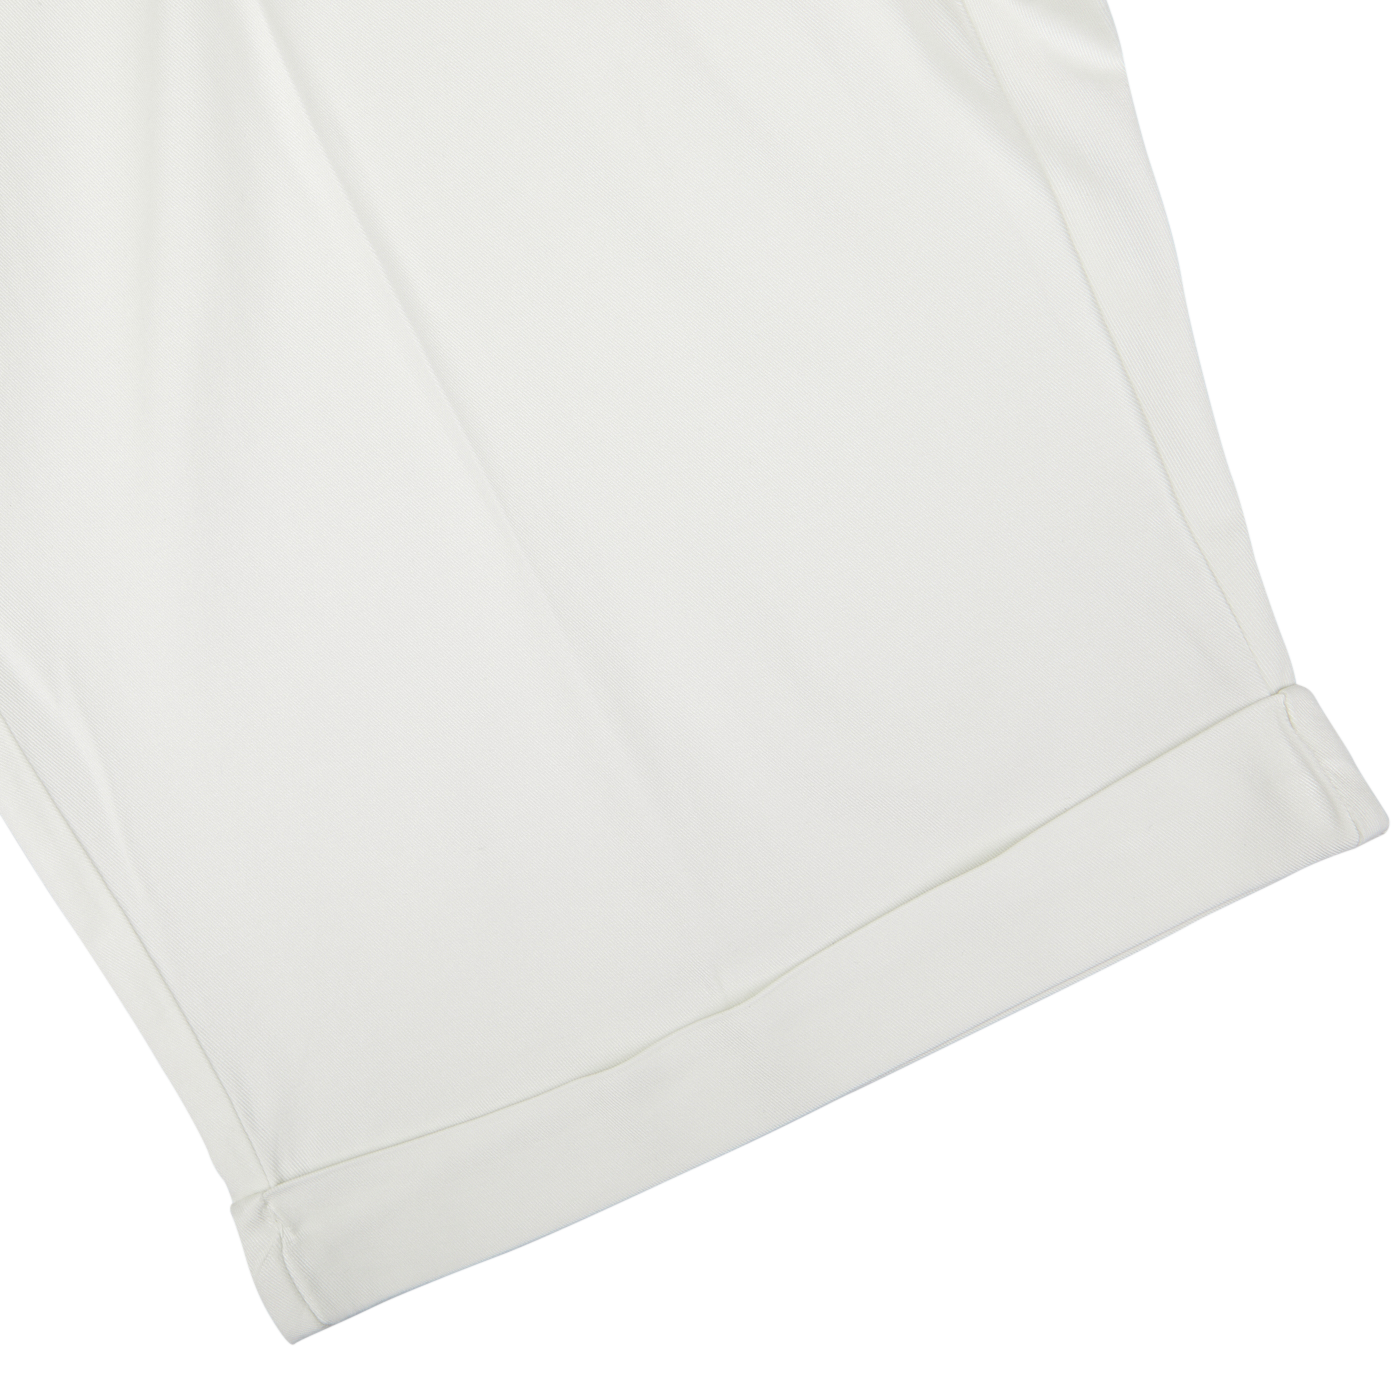 Off-White Cotton Blend Pleated Bermuda shorts by Berwich, with hem on a plain background and featuring a wider fit.